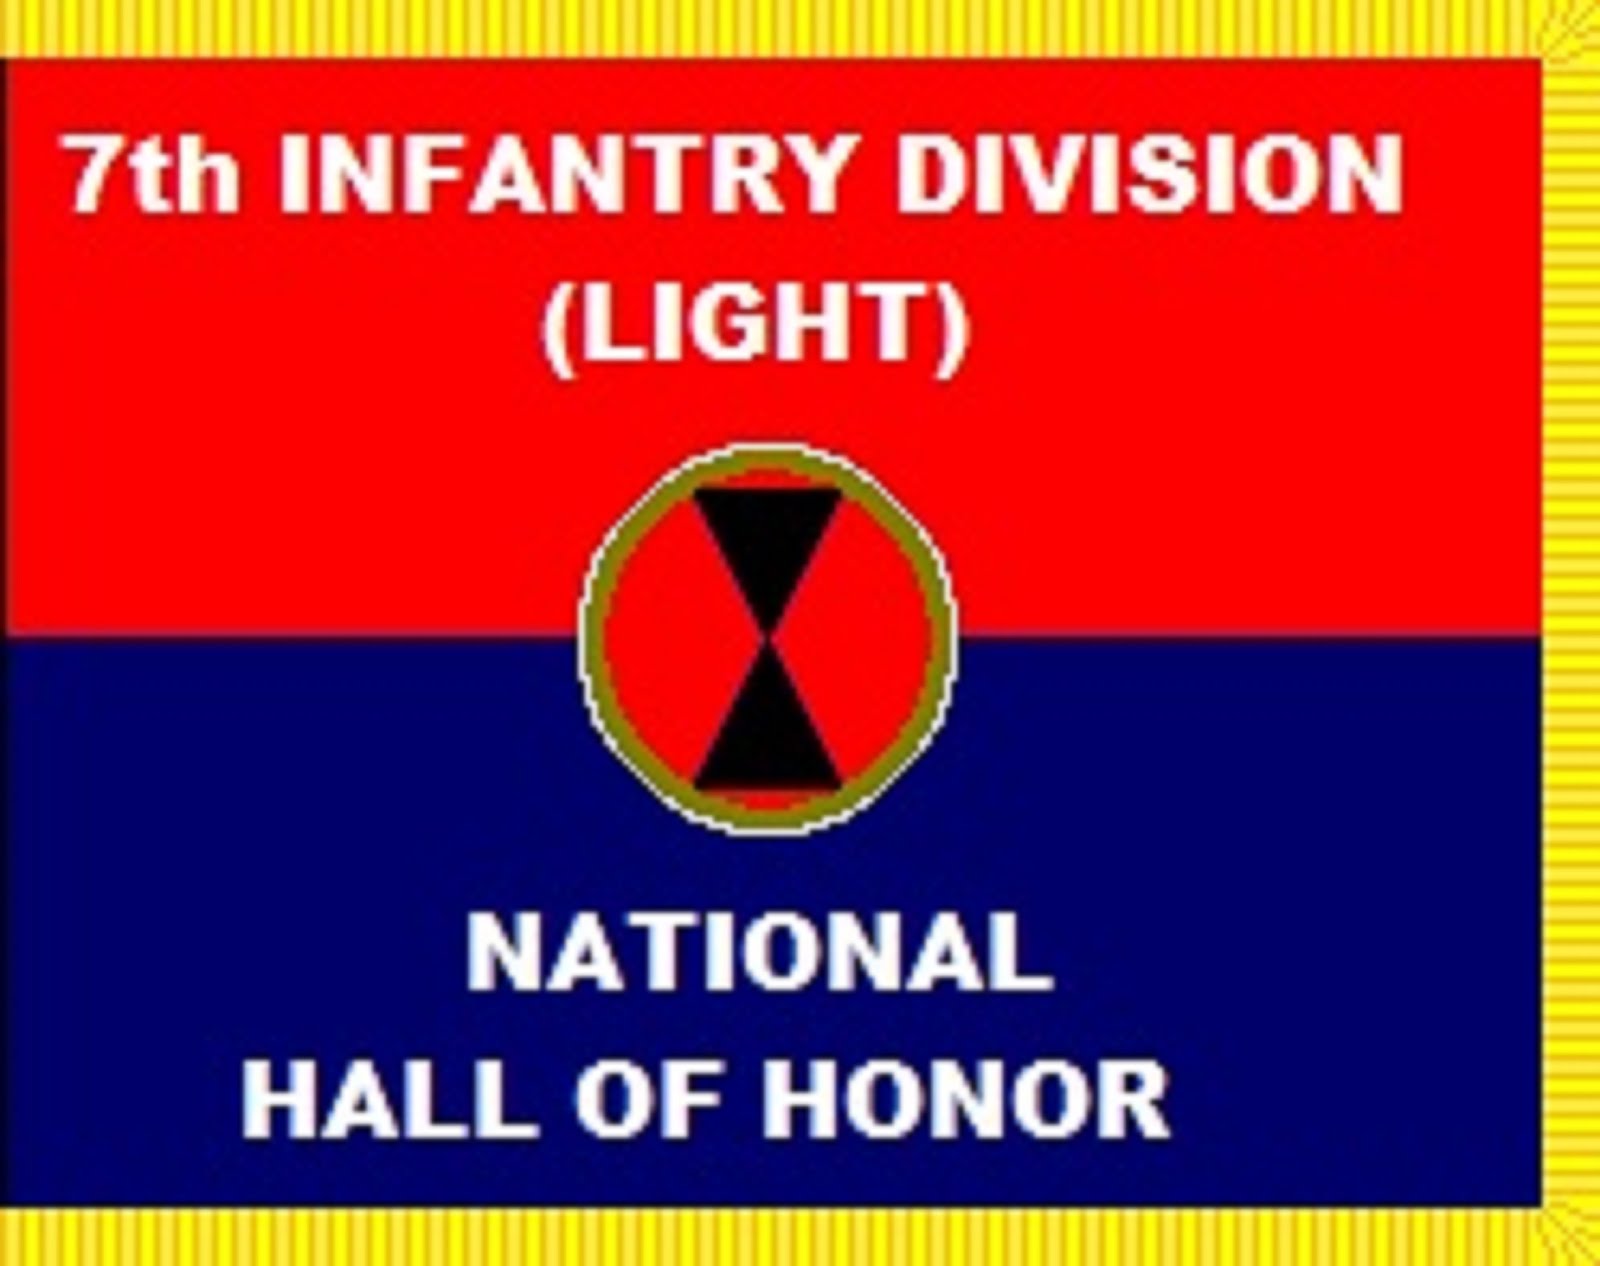 7th INFANTRY DIVISION  (LIGHT)  NATIOMAL HALL OFHONOR